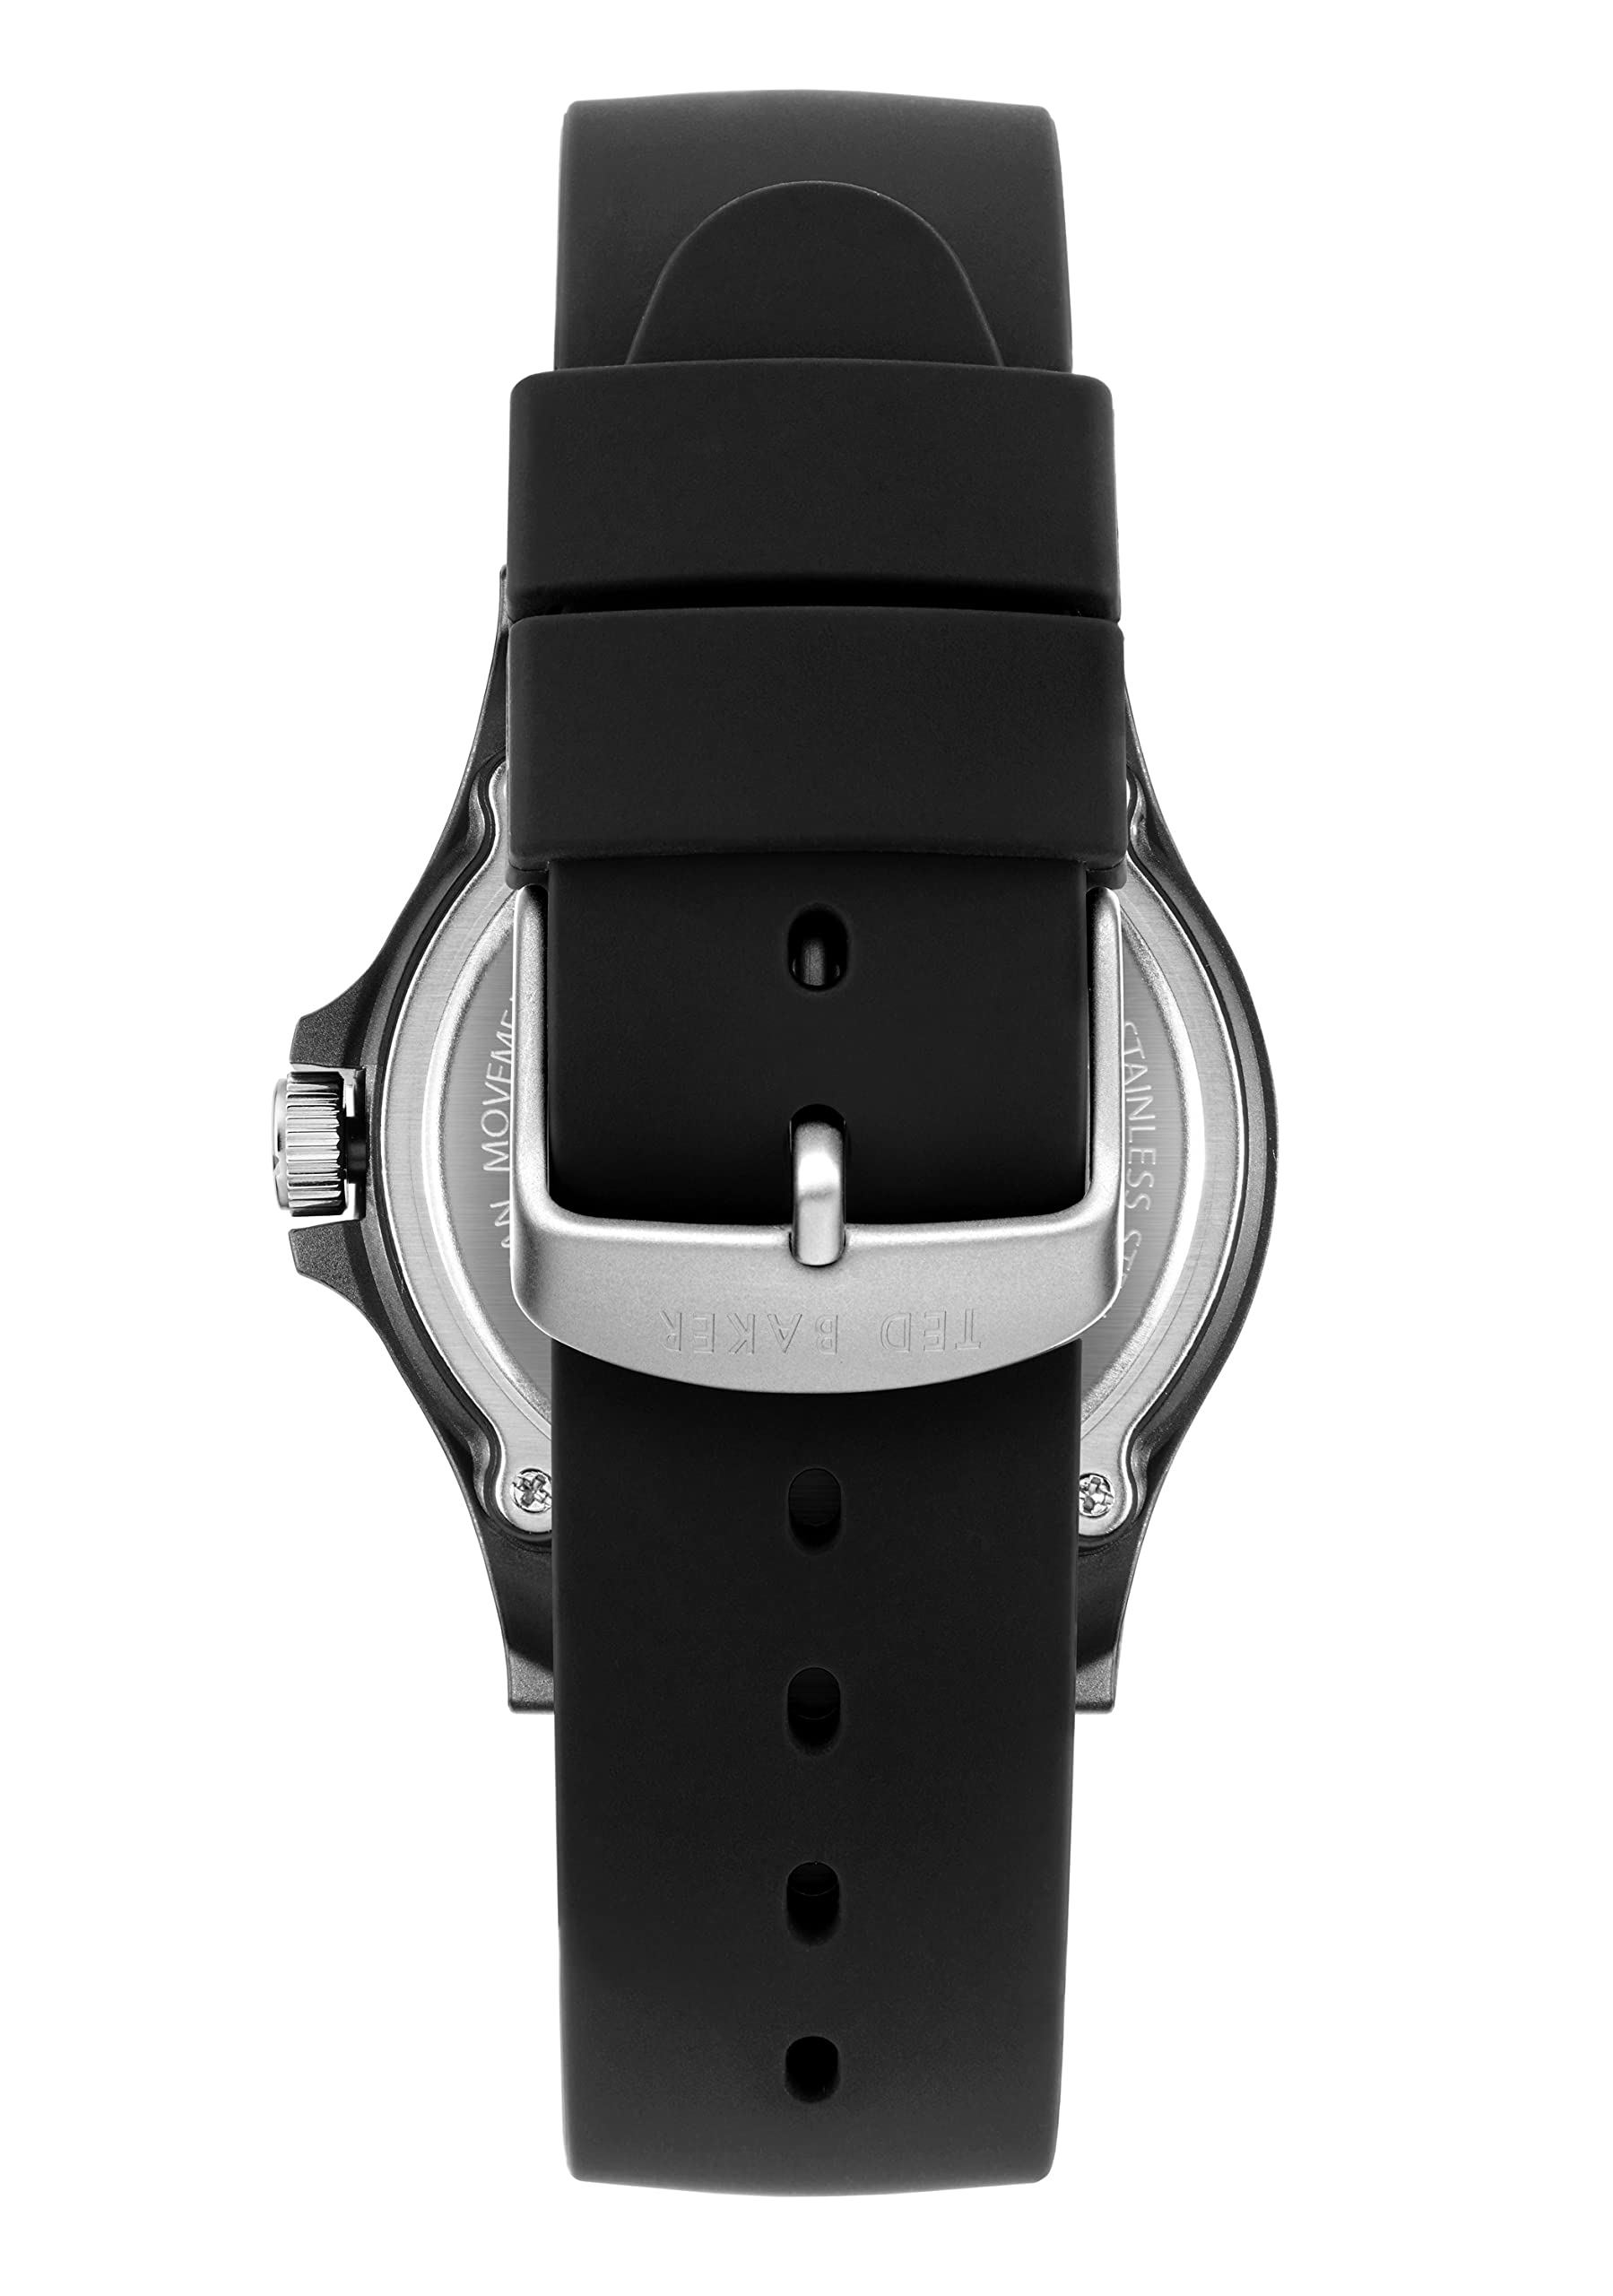 Ted Baker Gents Black Silicone Strap Watch (Model: BKPIRS3019I)